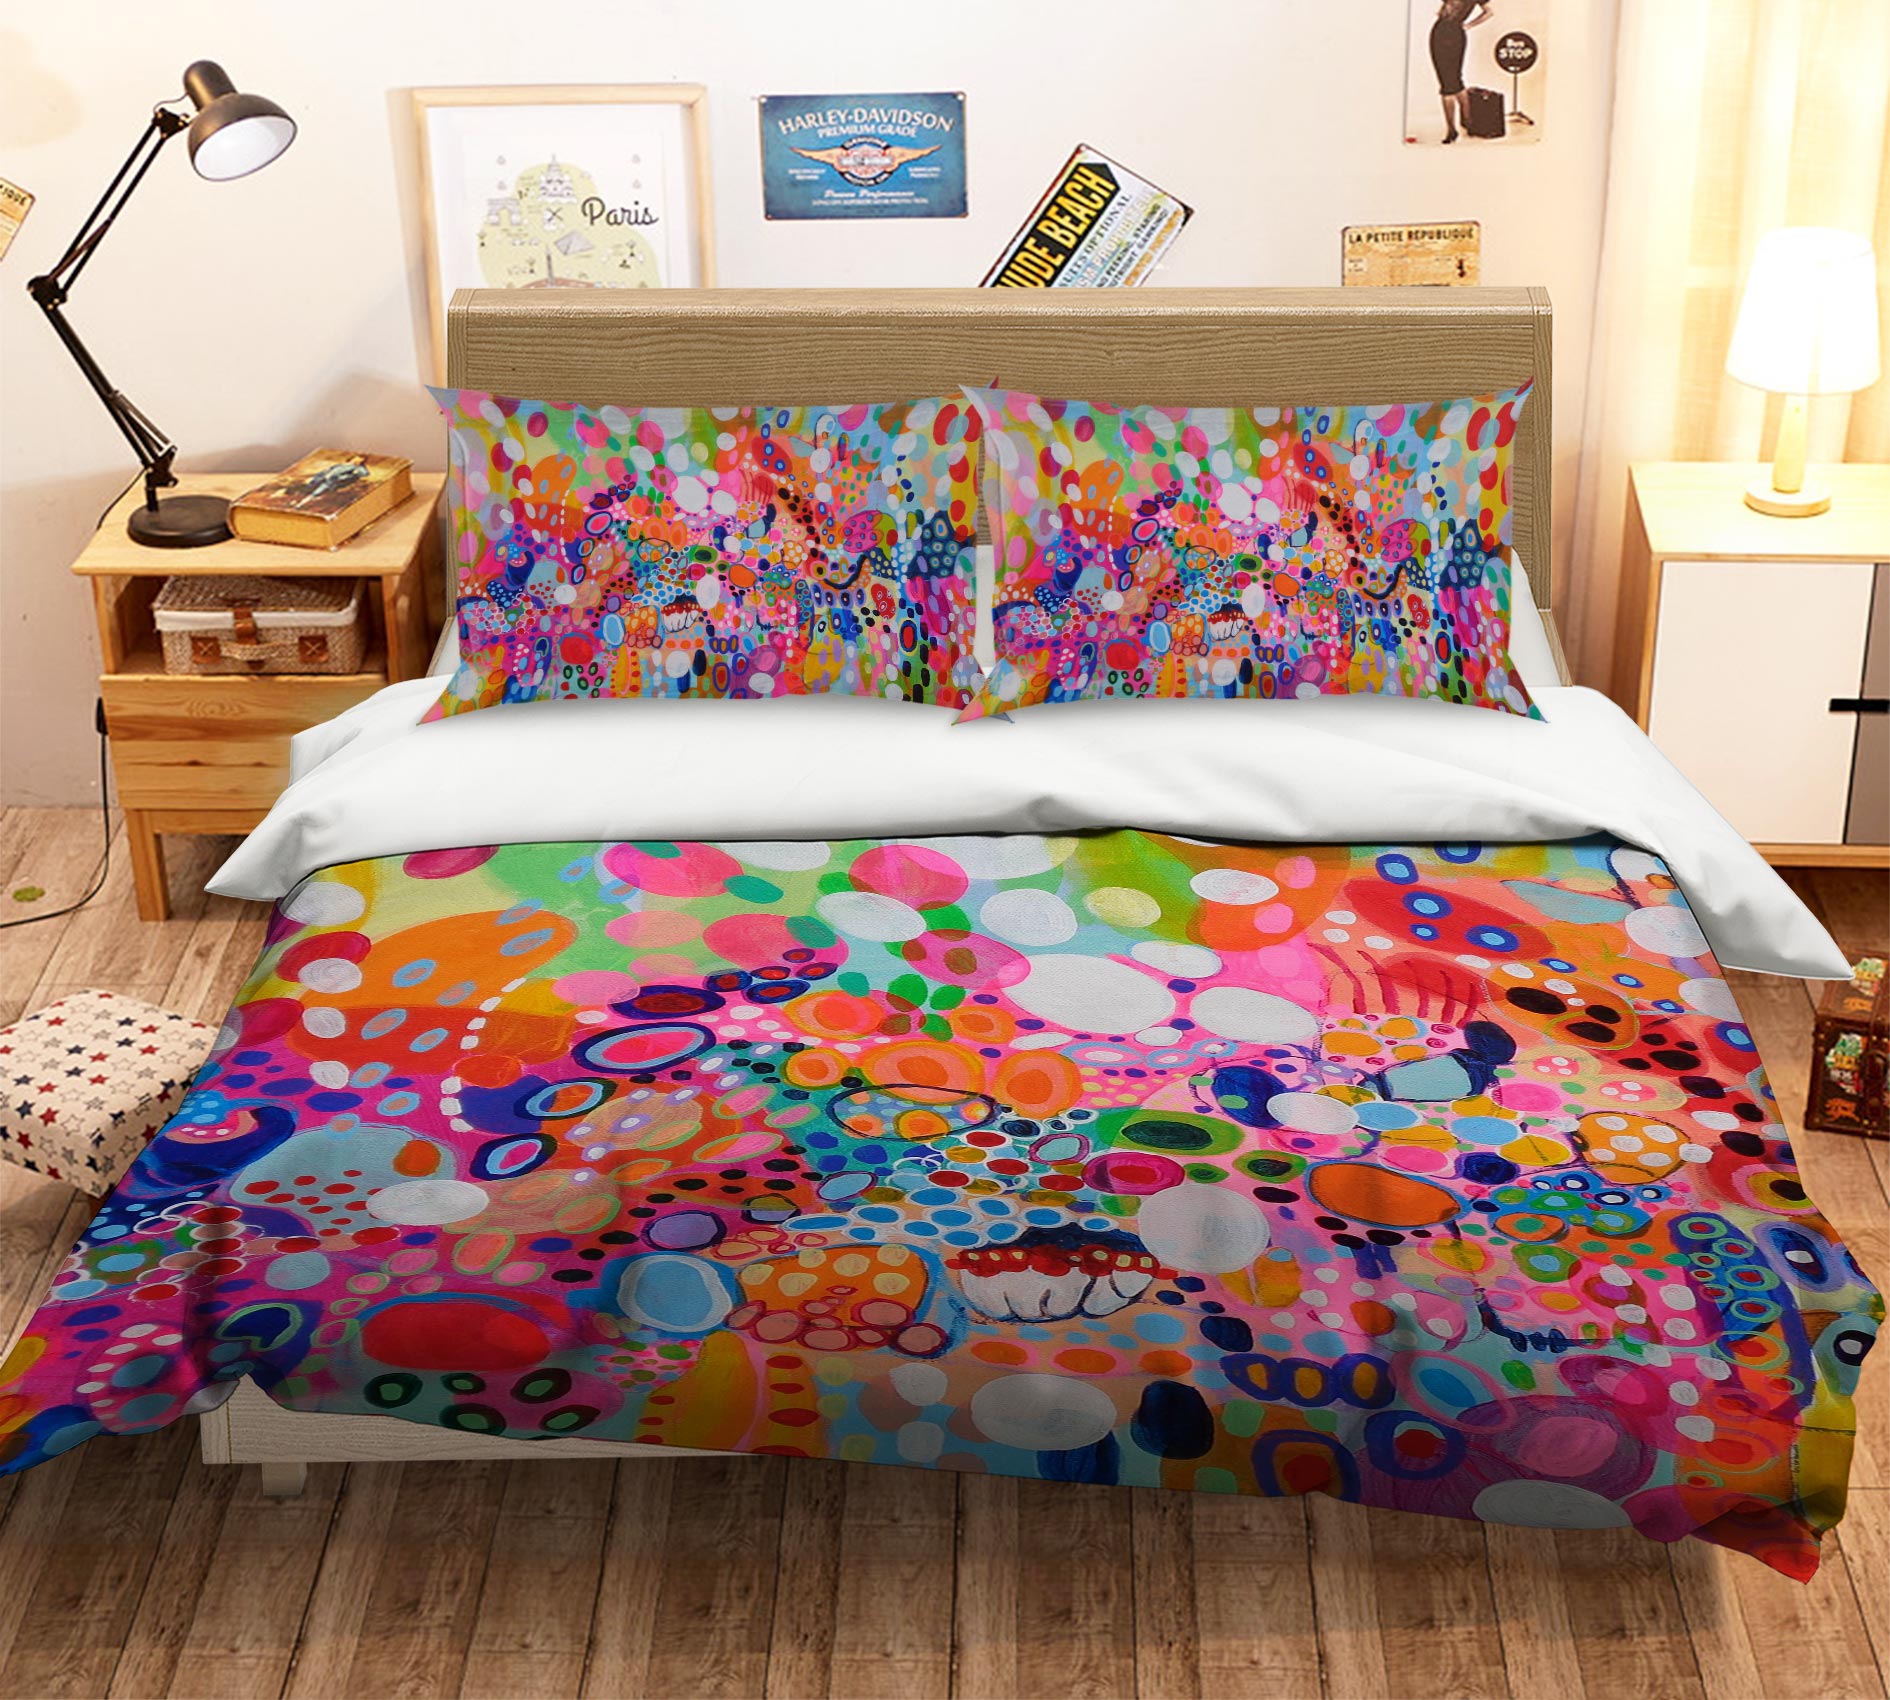 3D Colorful Painting 1137 Misako Chida Bedding Bed Pillowcases Quilt Cover Duvet Cover